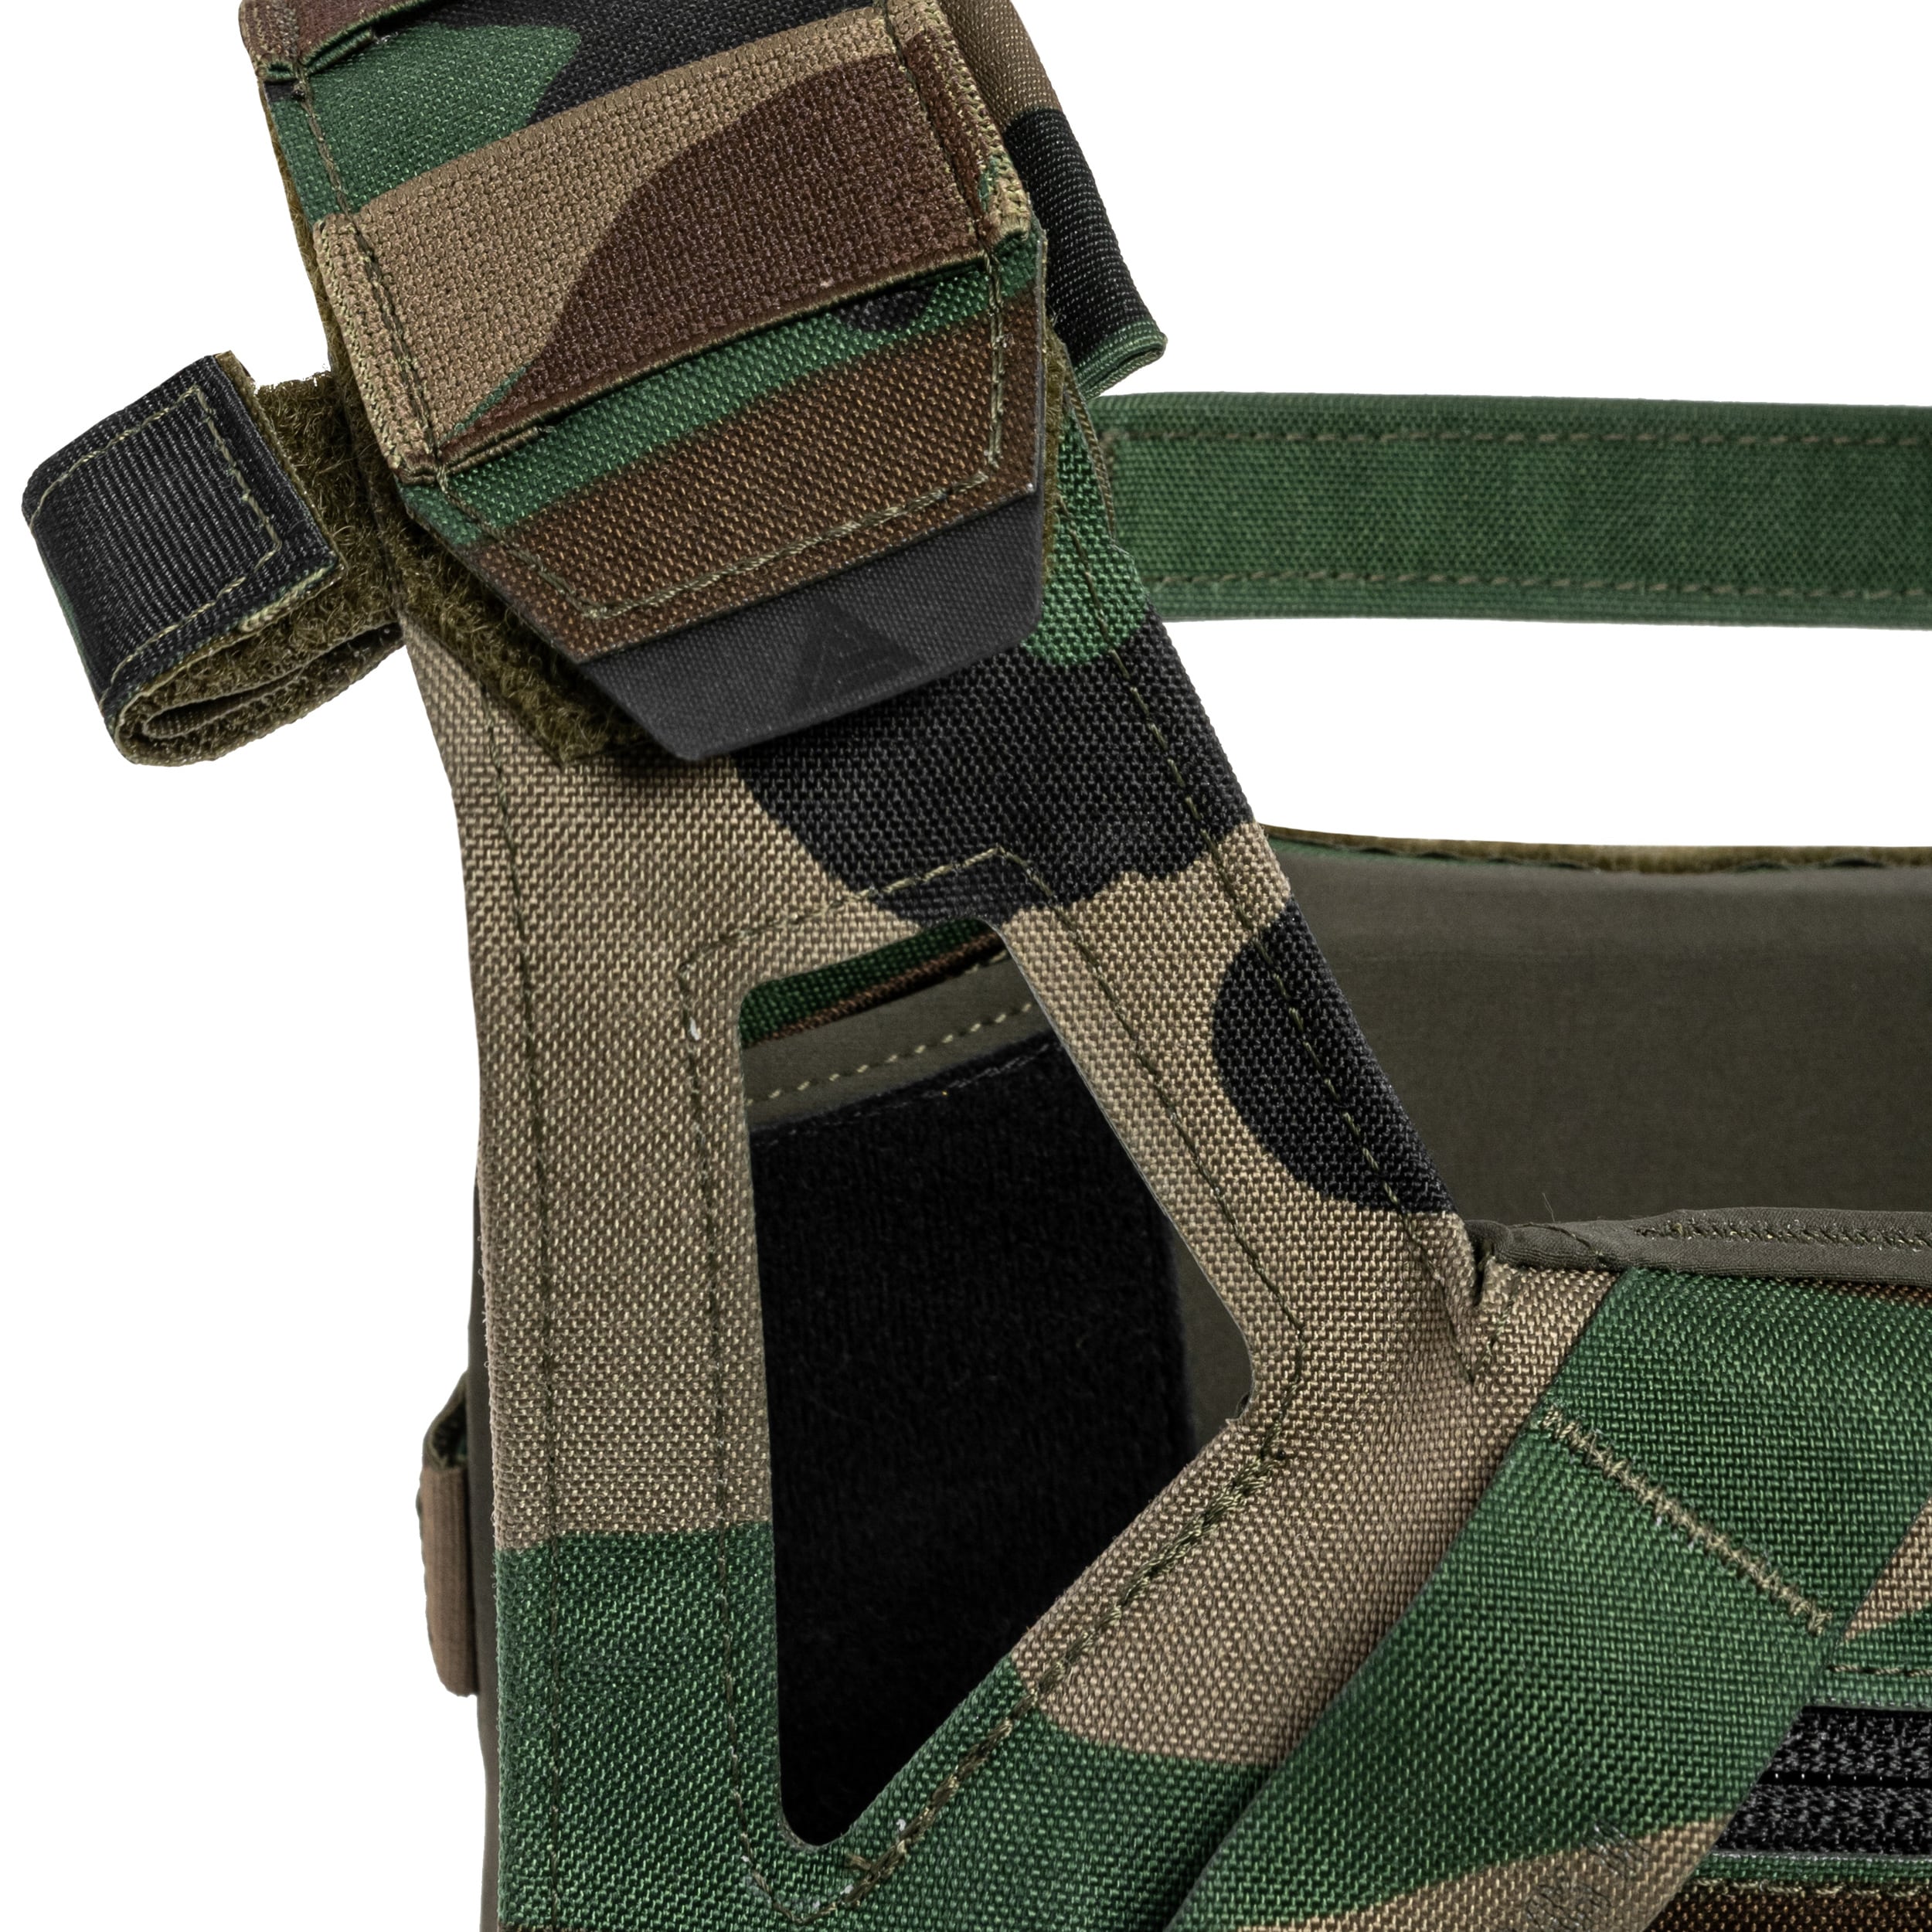 Плитоноска Direct Action Spitfire MK II Plate Carrier - Woodland 